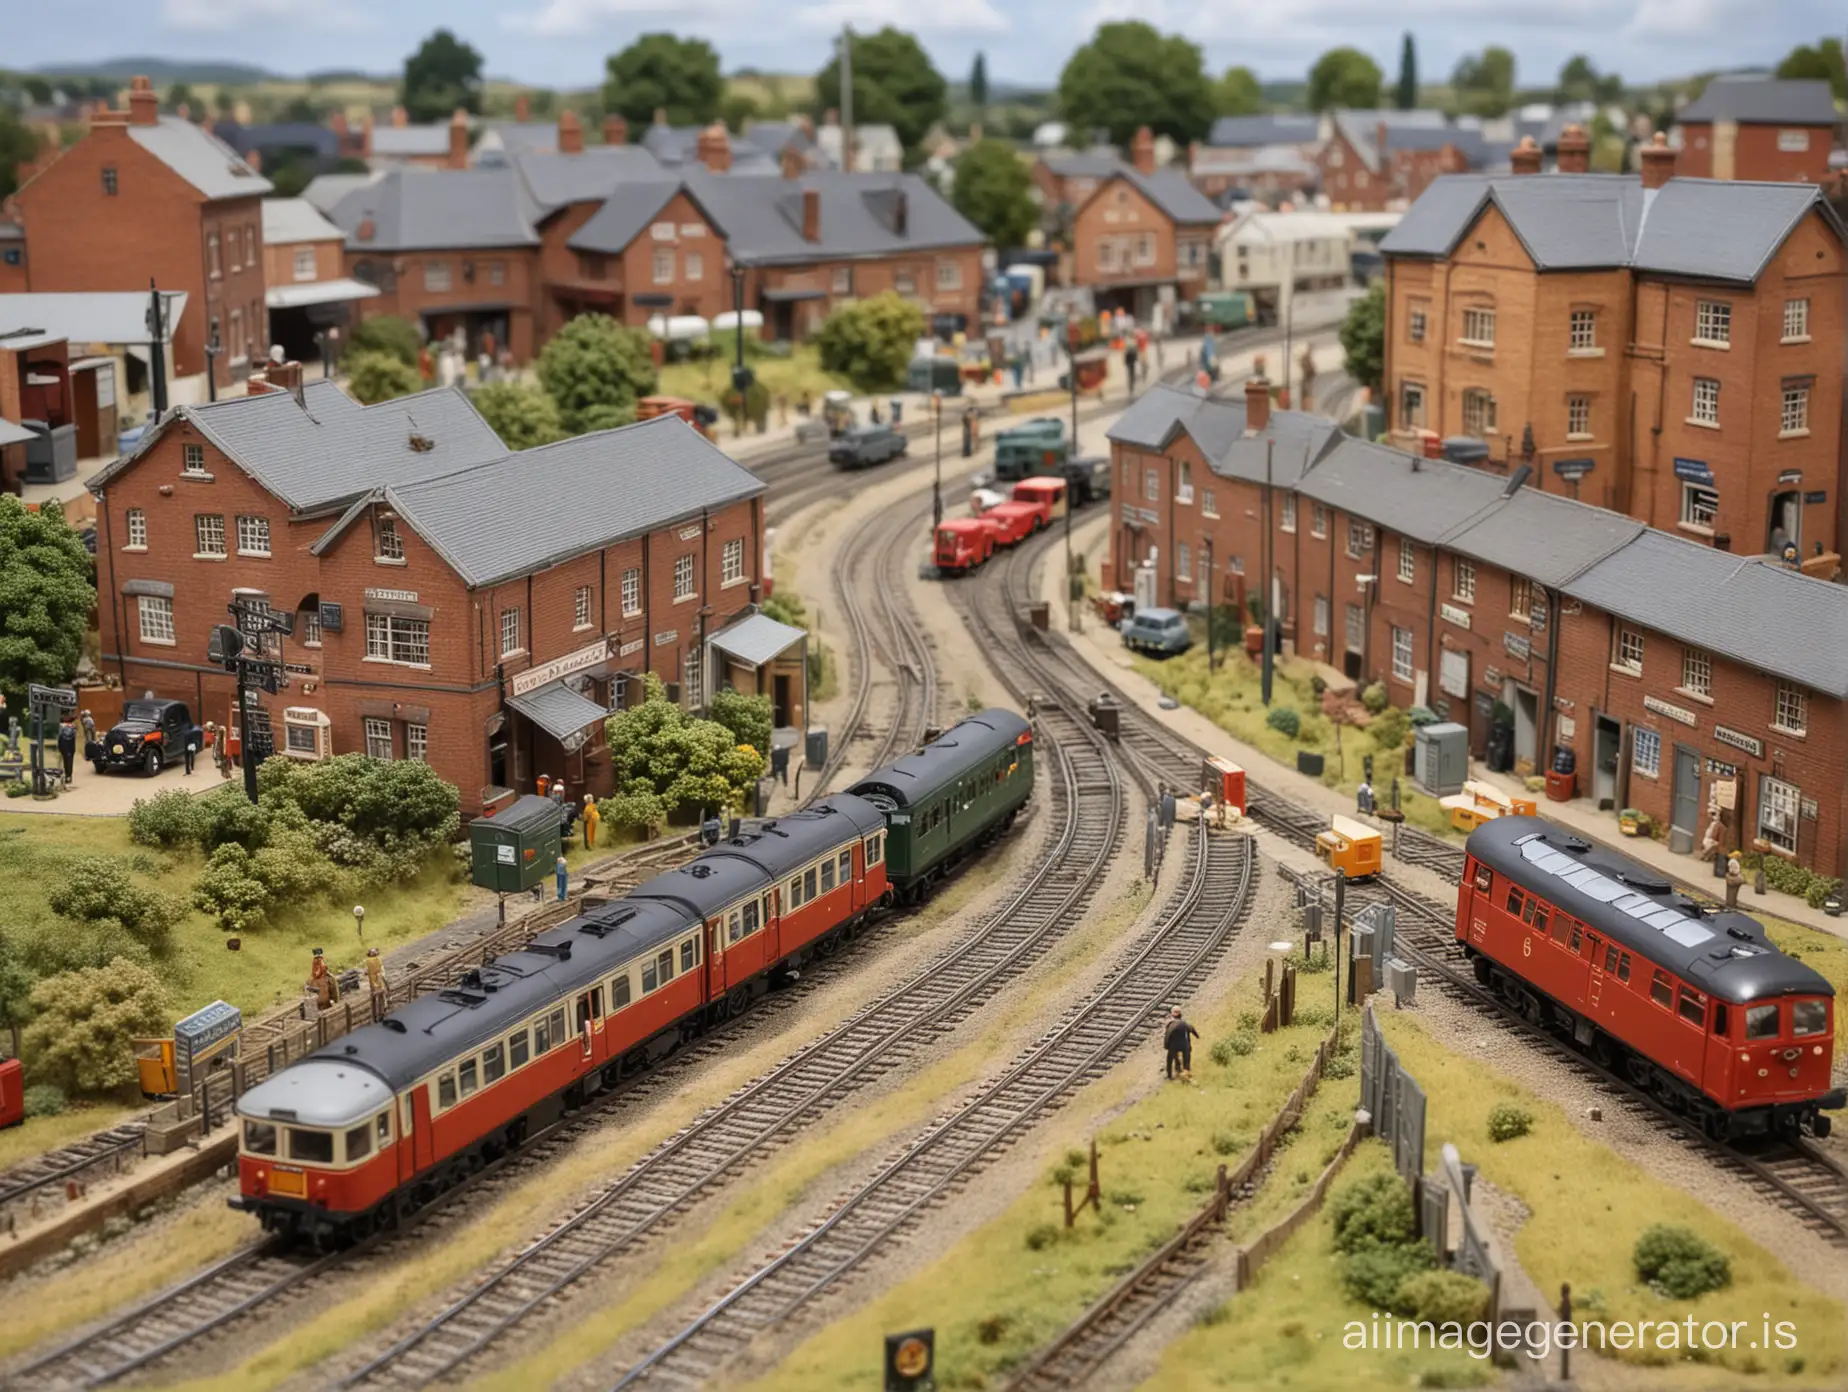 Miniature-Railway-Diorama-with-Steam-Train-Bus-and-Factory-Backdrop